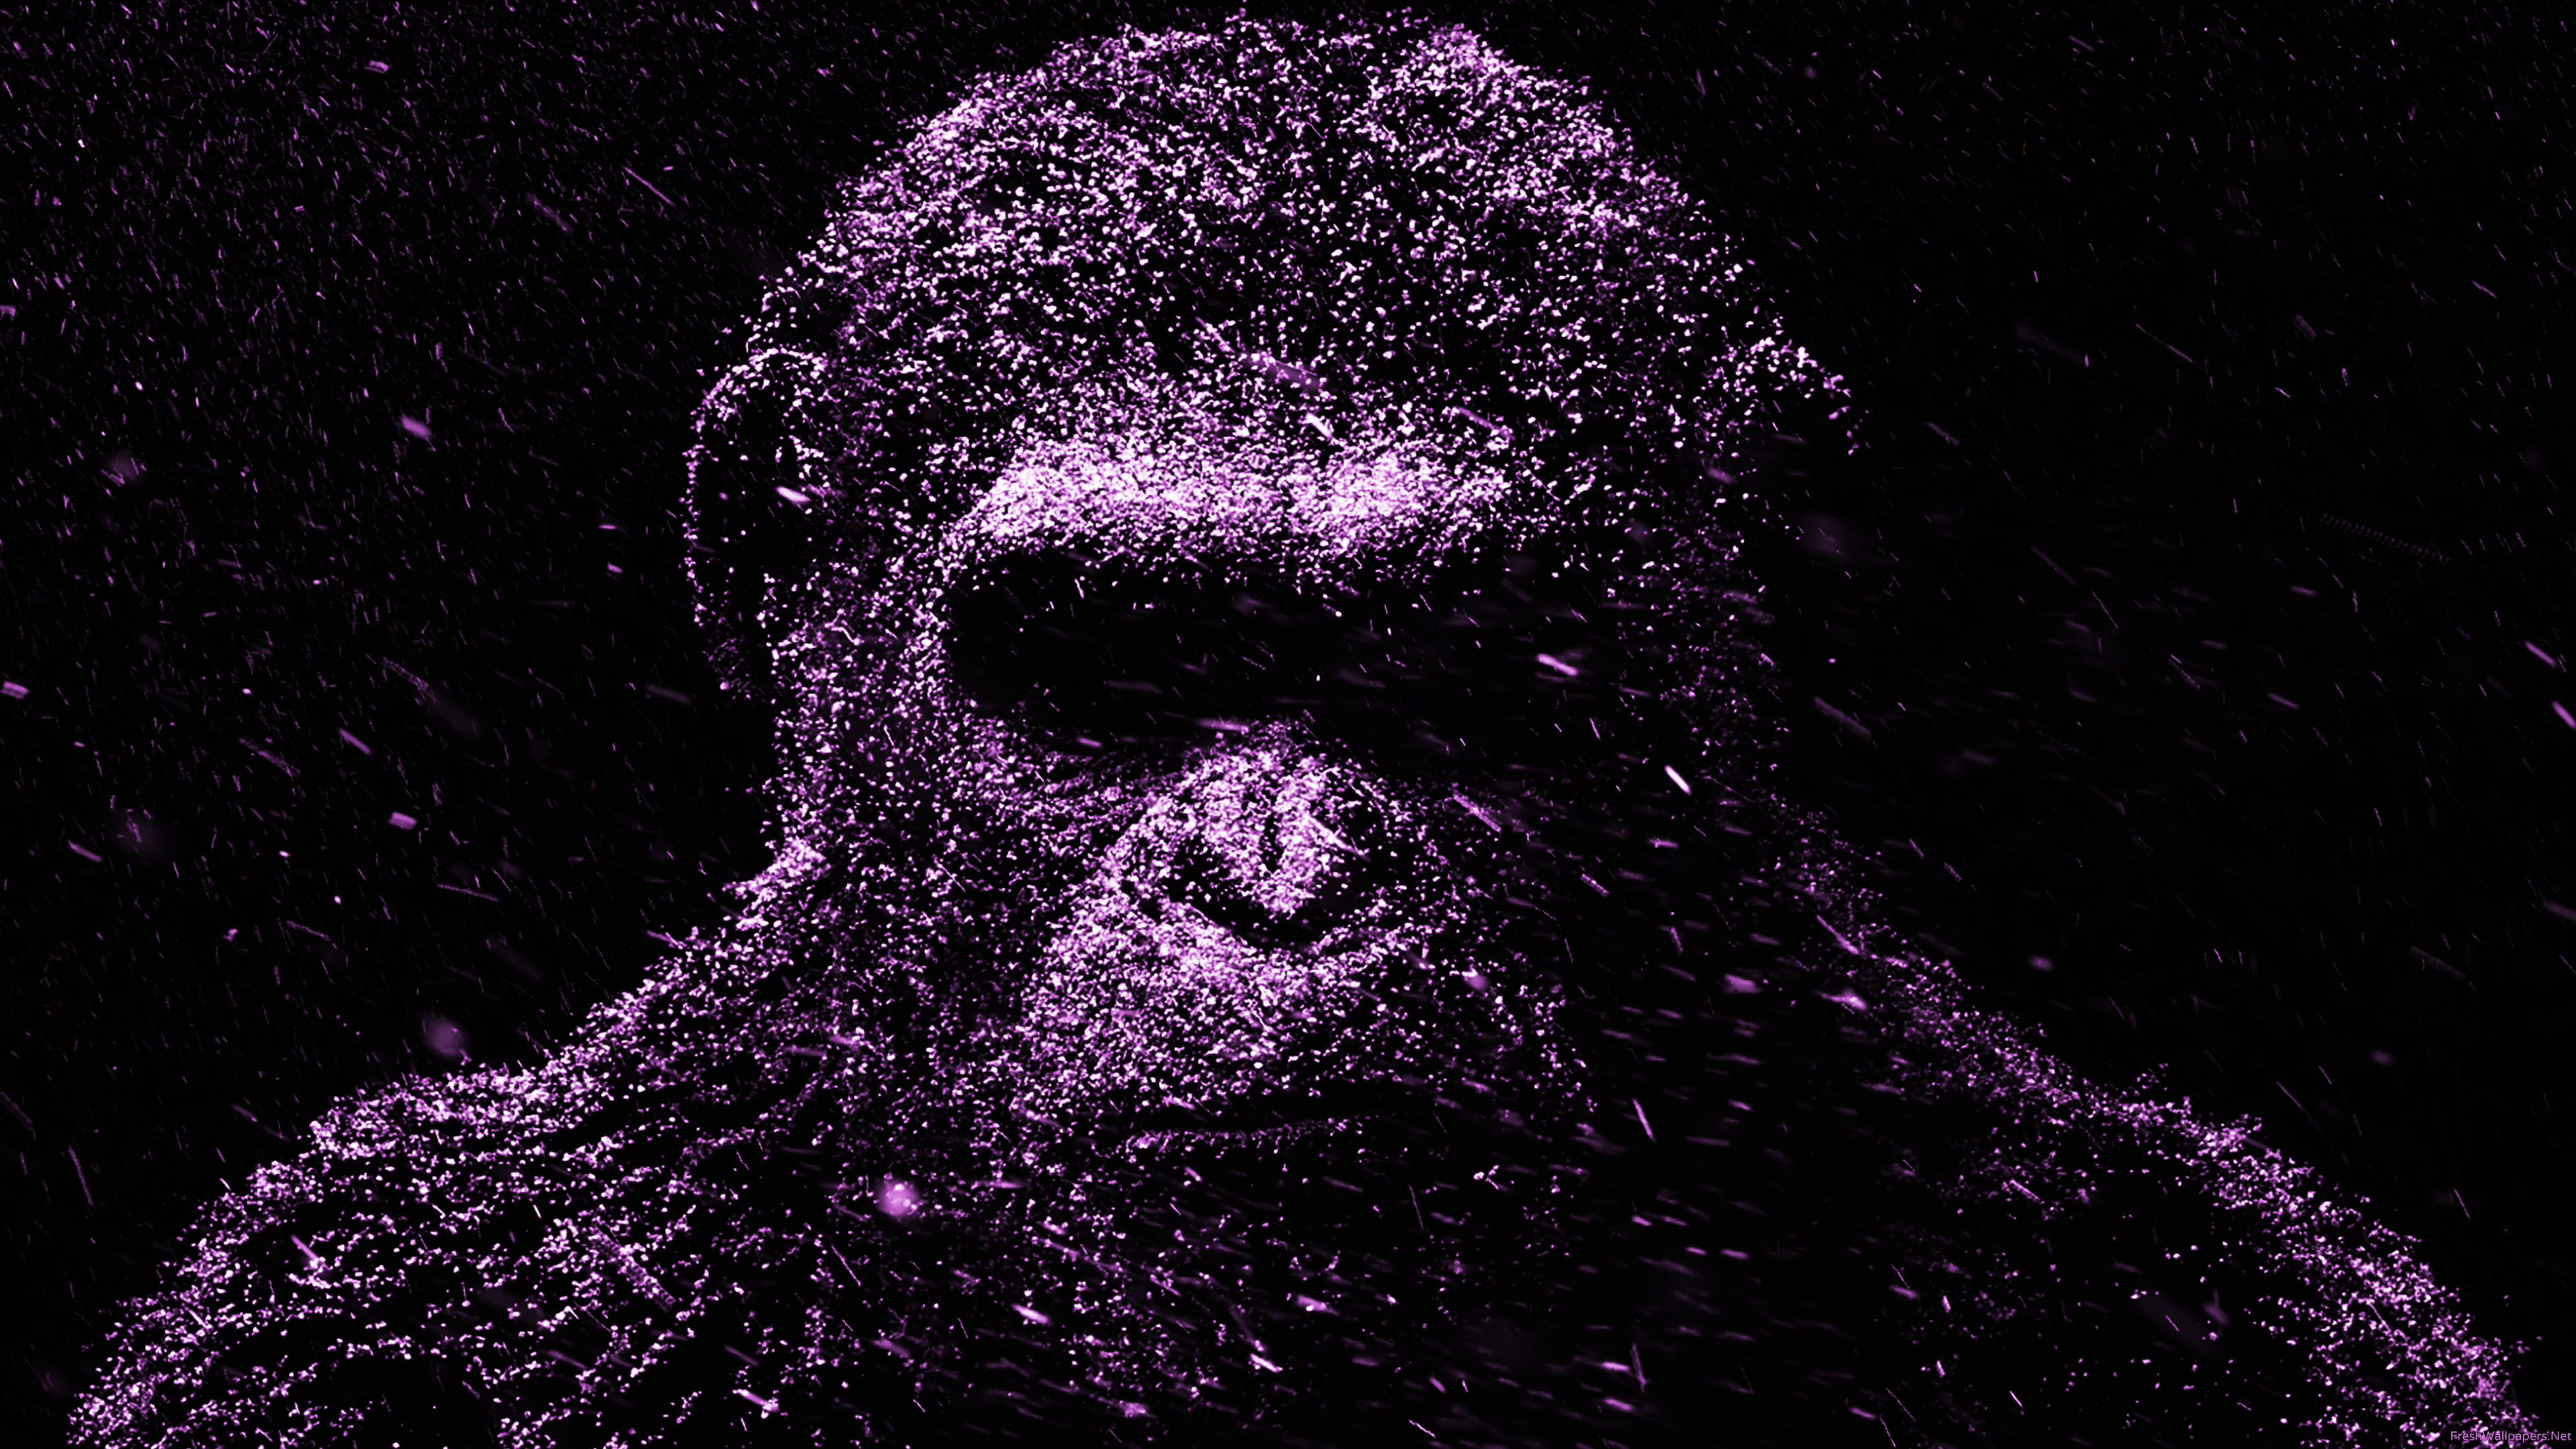 monkey wallpaper, Caesar, War for the Planet of the Apes, Purple